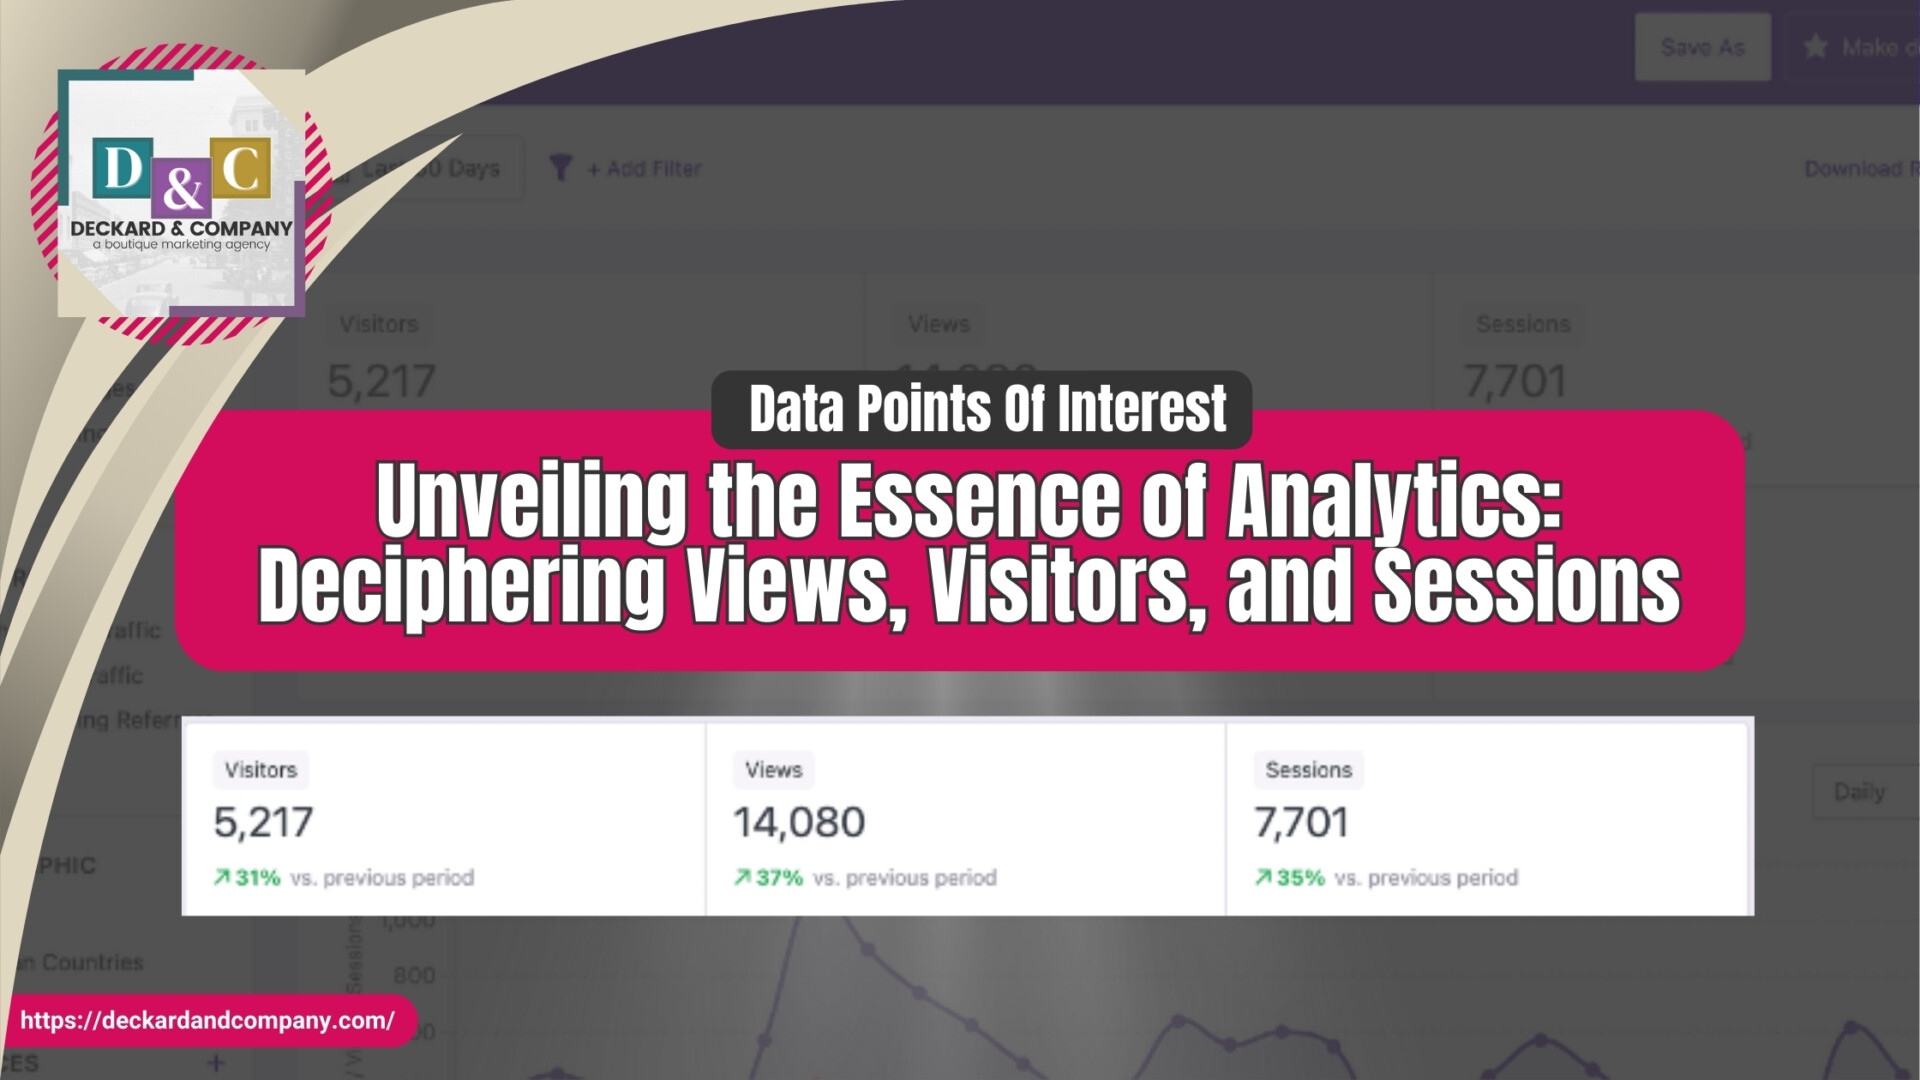 Unveiling the Essence of Analytics Deciphering Views, Visitors, and Sessions with Deckard & Company, a Bradenton SEO Agency